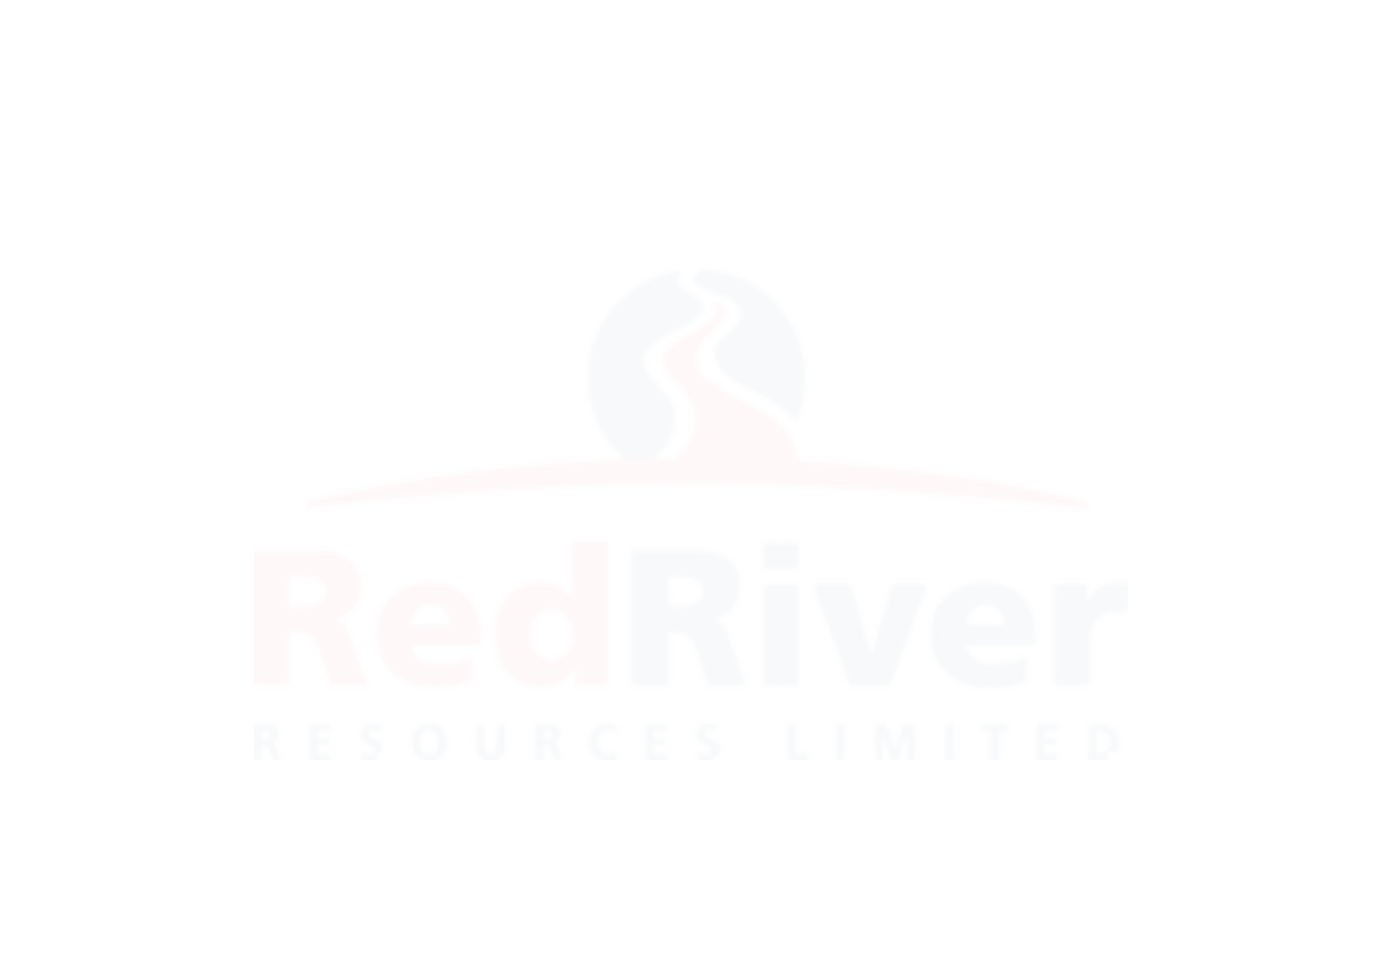 Red River Resources